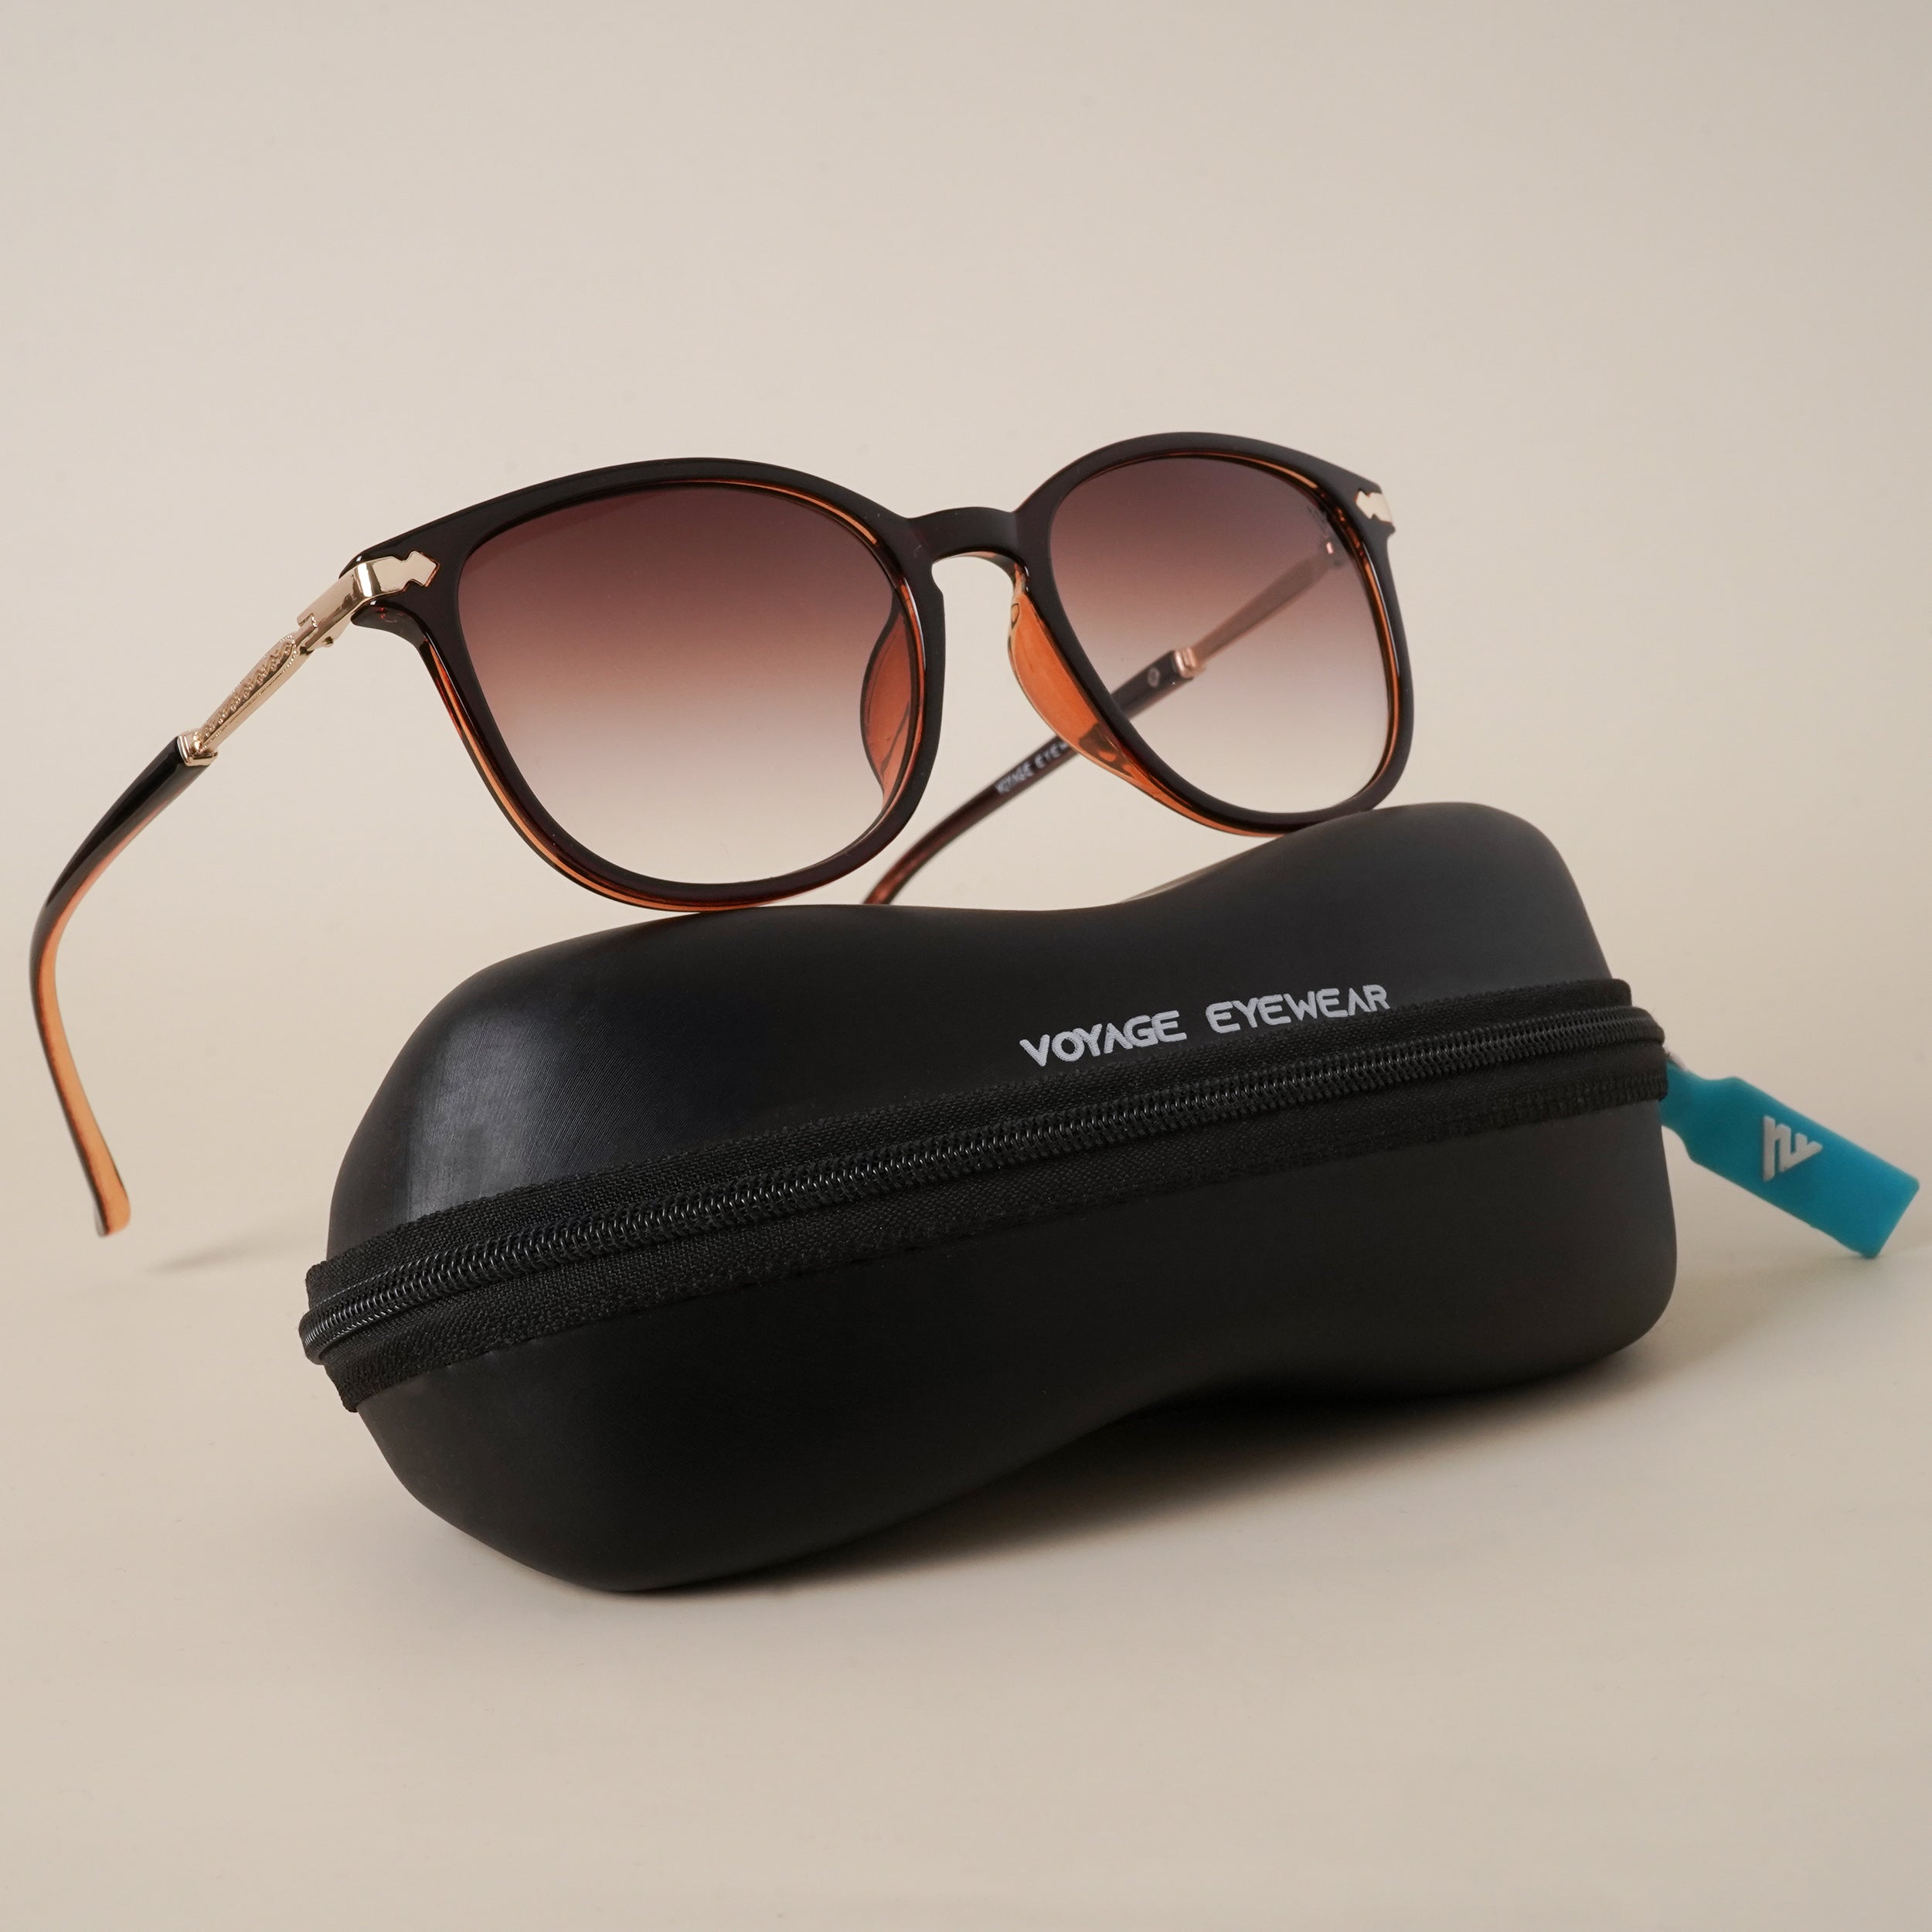 Voyage Brown Over Size Sunglasses - MG3183